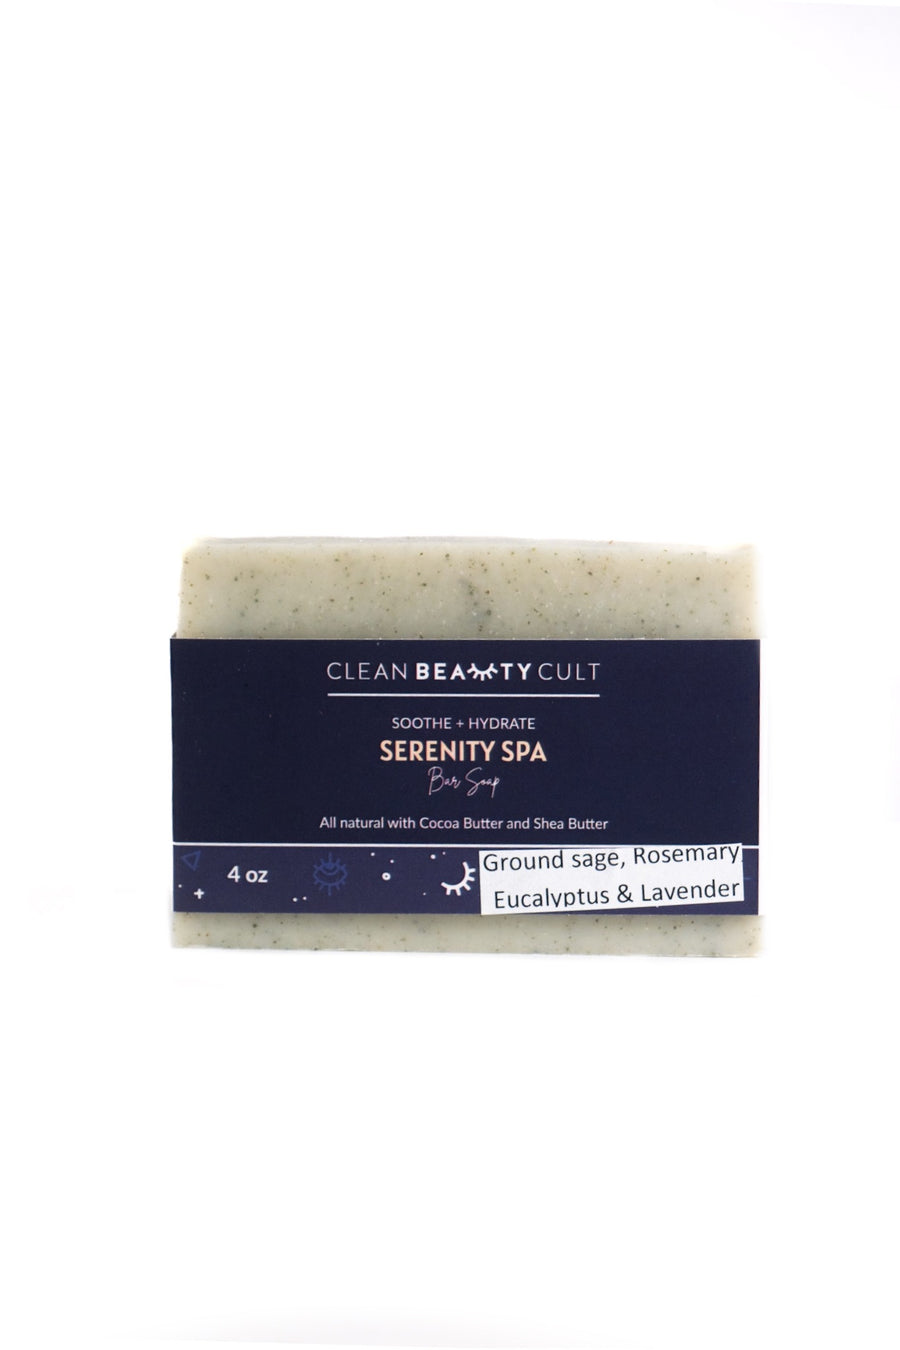 Exfoliating Serenity Spa Bar Soap by Clean Beauty Cult